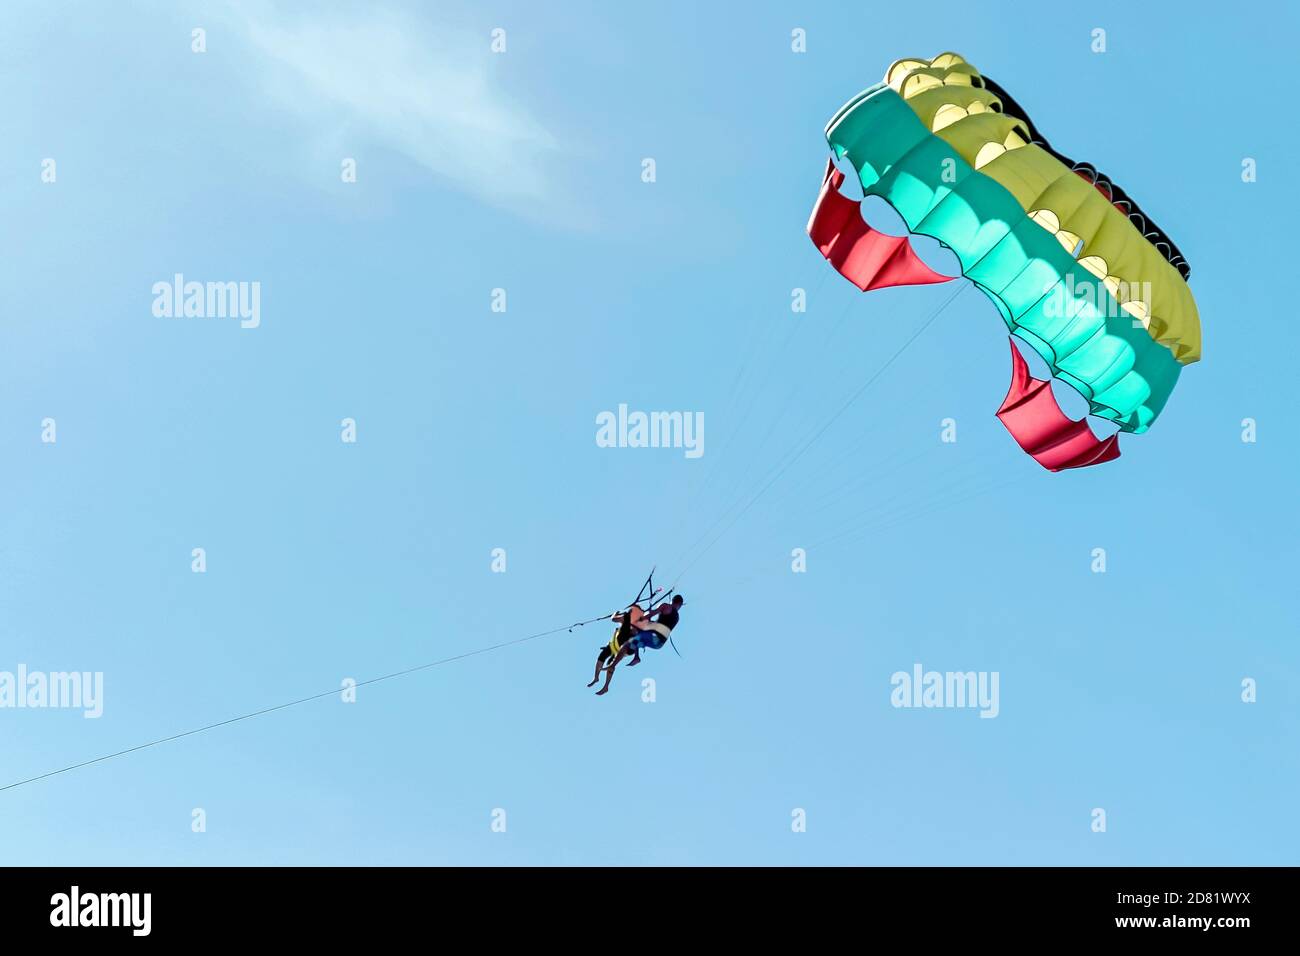 sky diving with colorful parachute Stock Photo